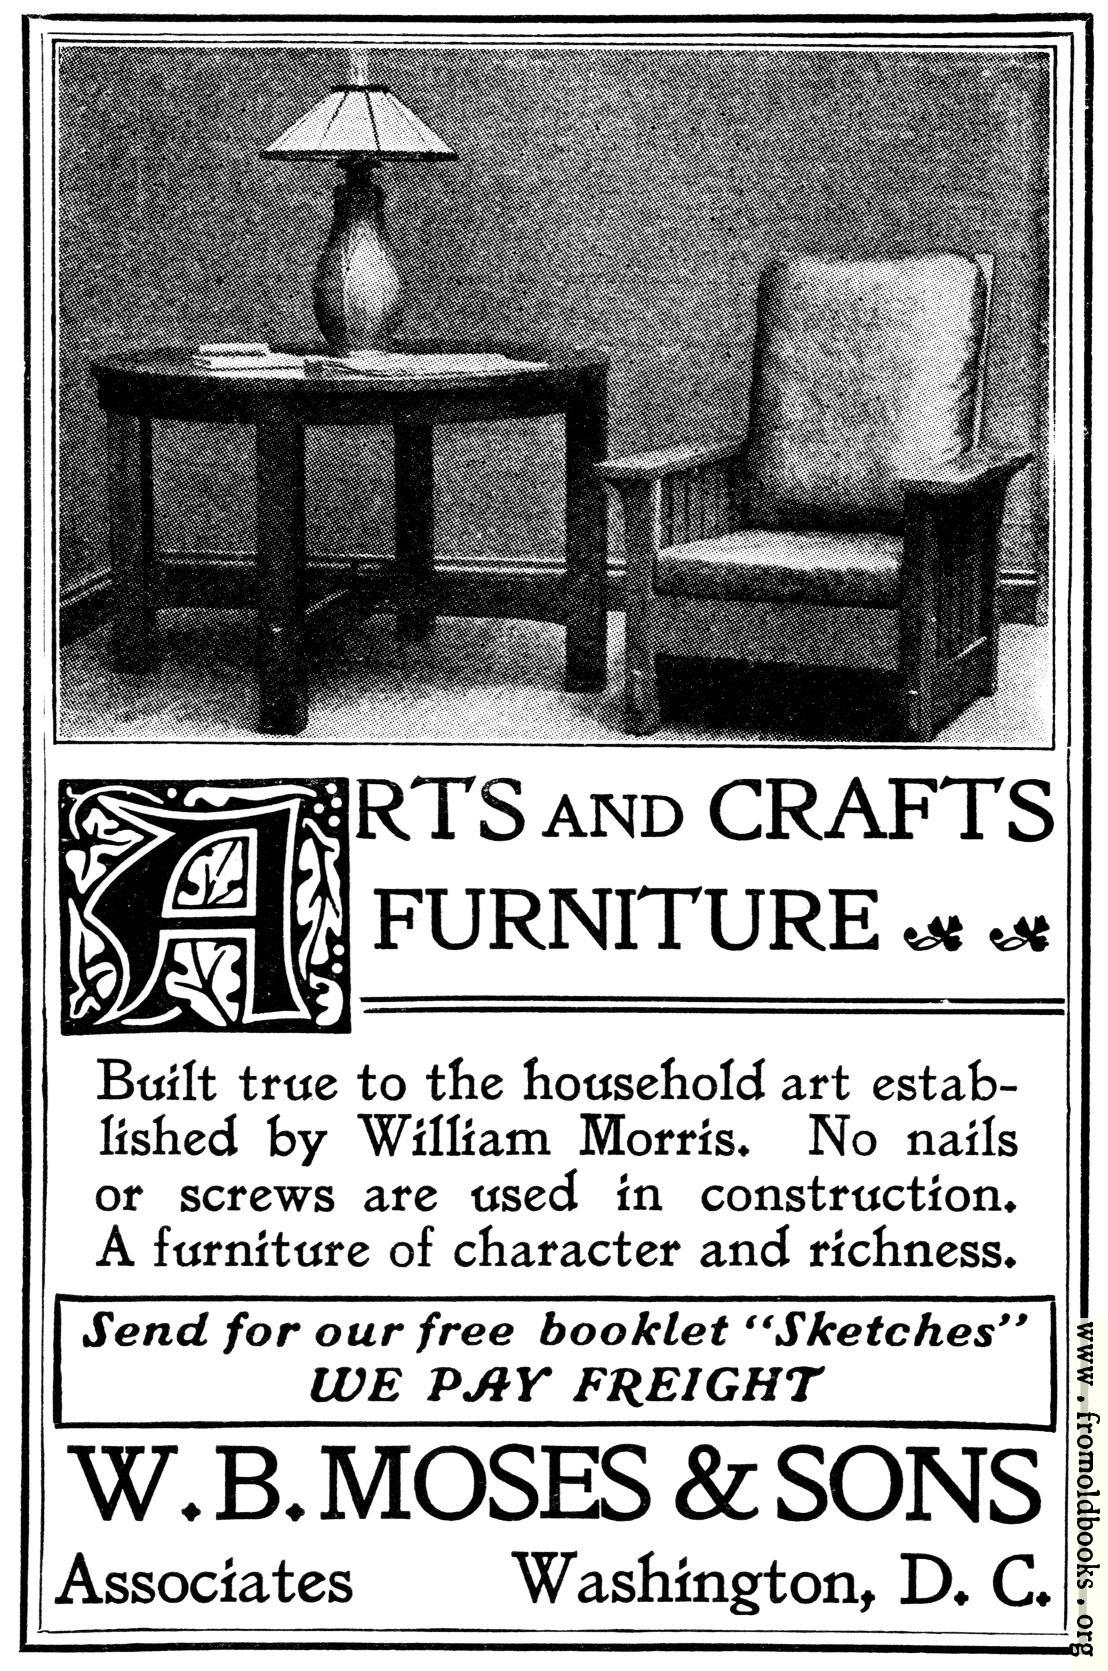 [Picture: Old Advert: Arts and Crafts Furniture]